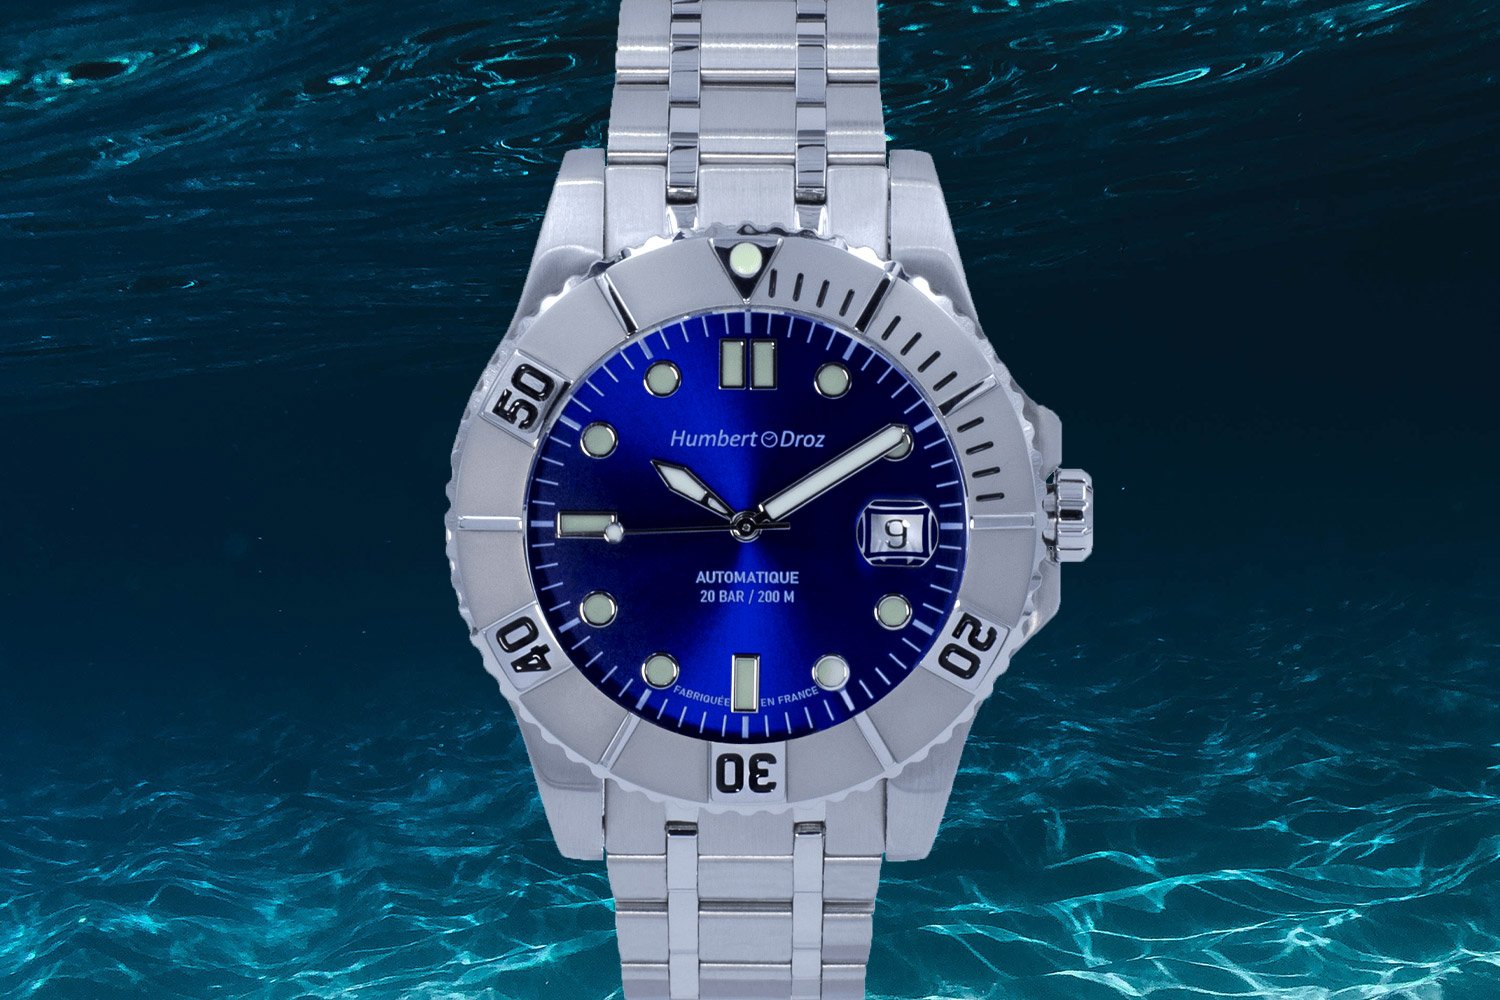 Humbert-Droz HD9 launches its first diver